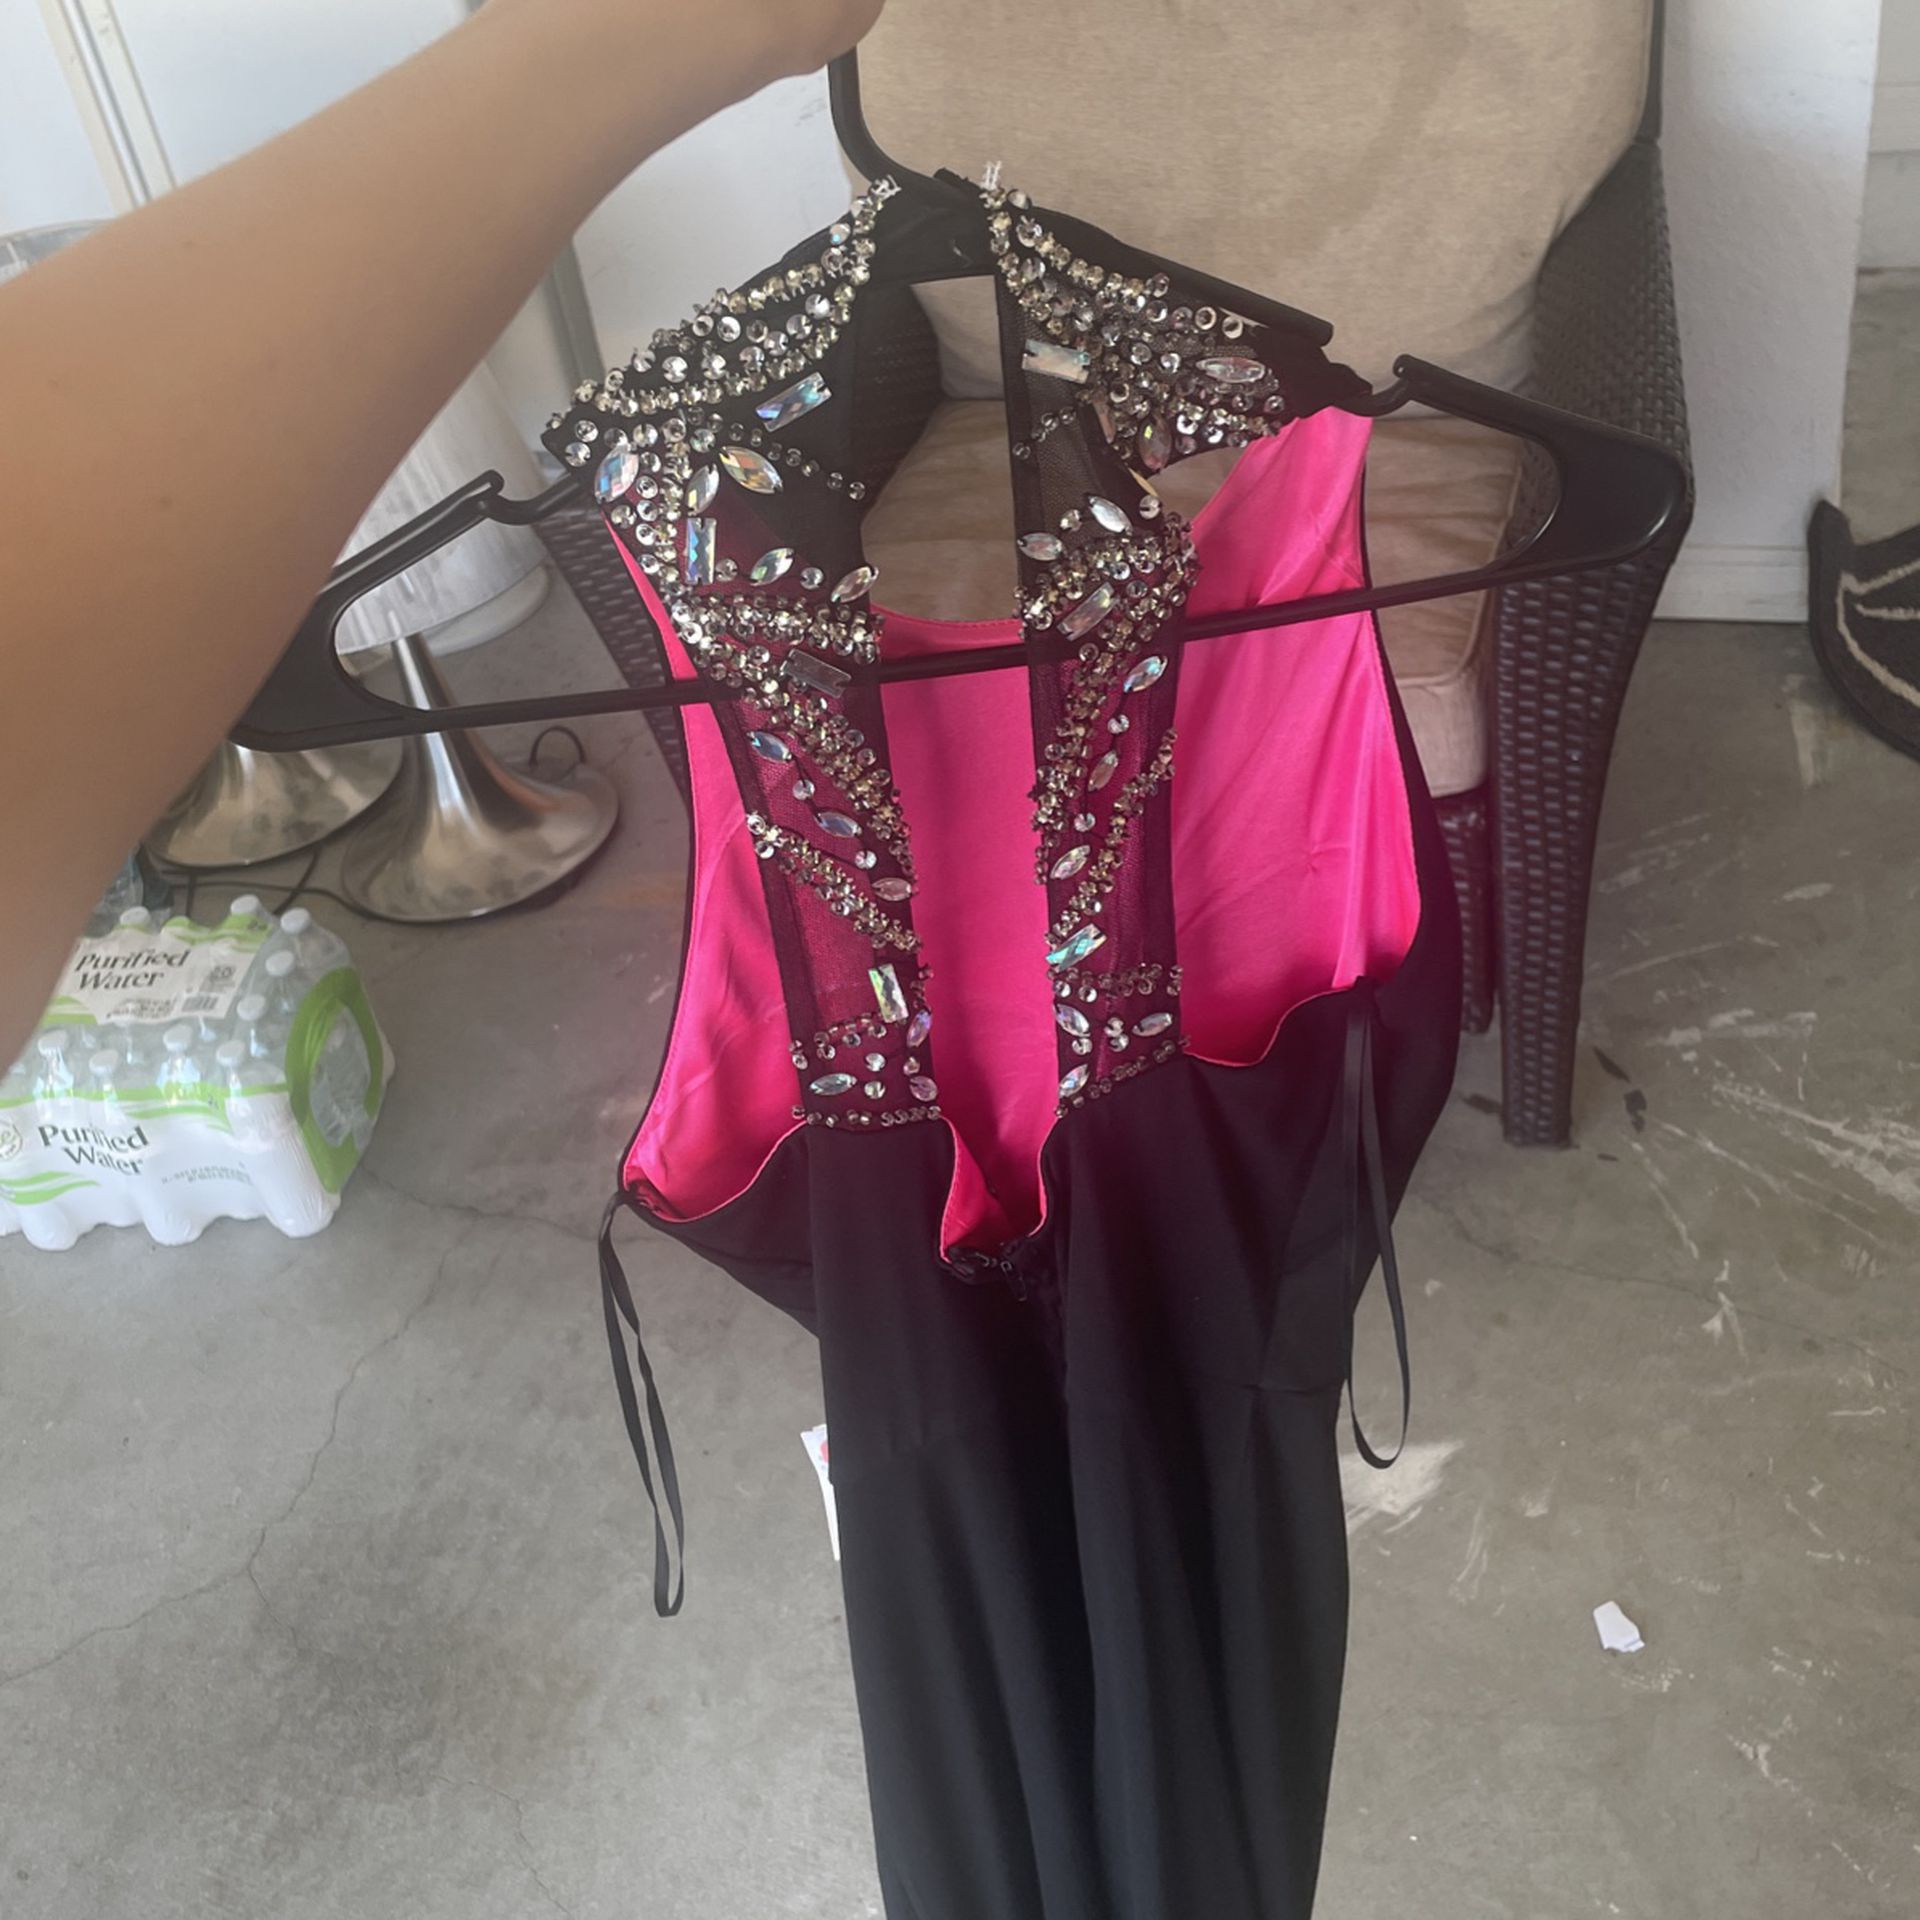 Dress For Sale 15